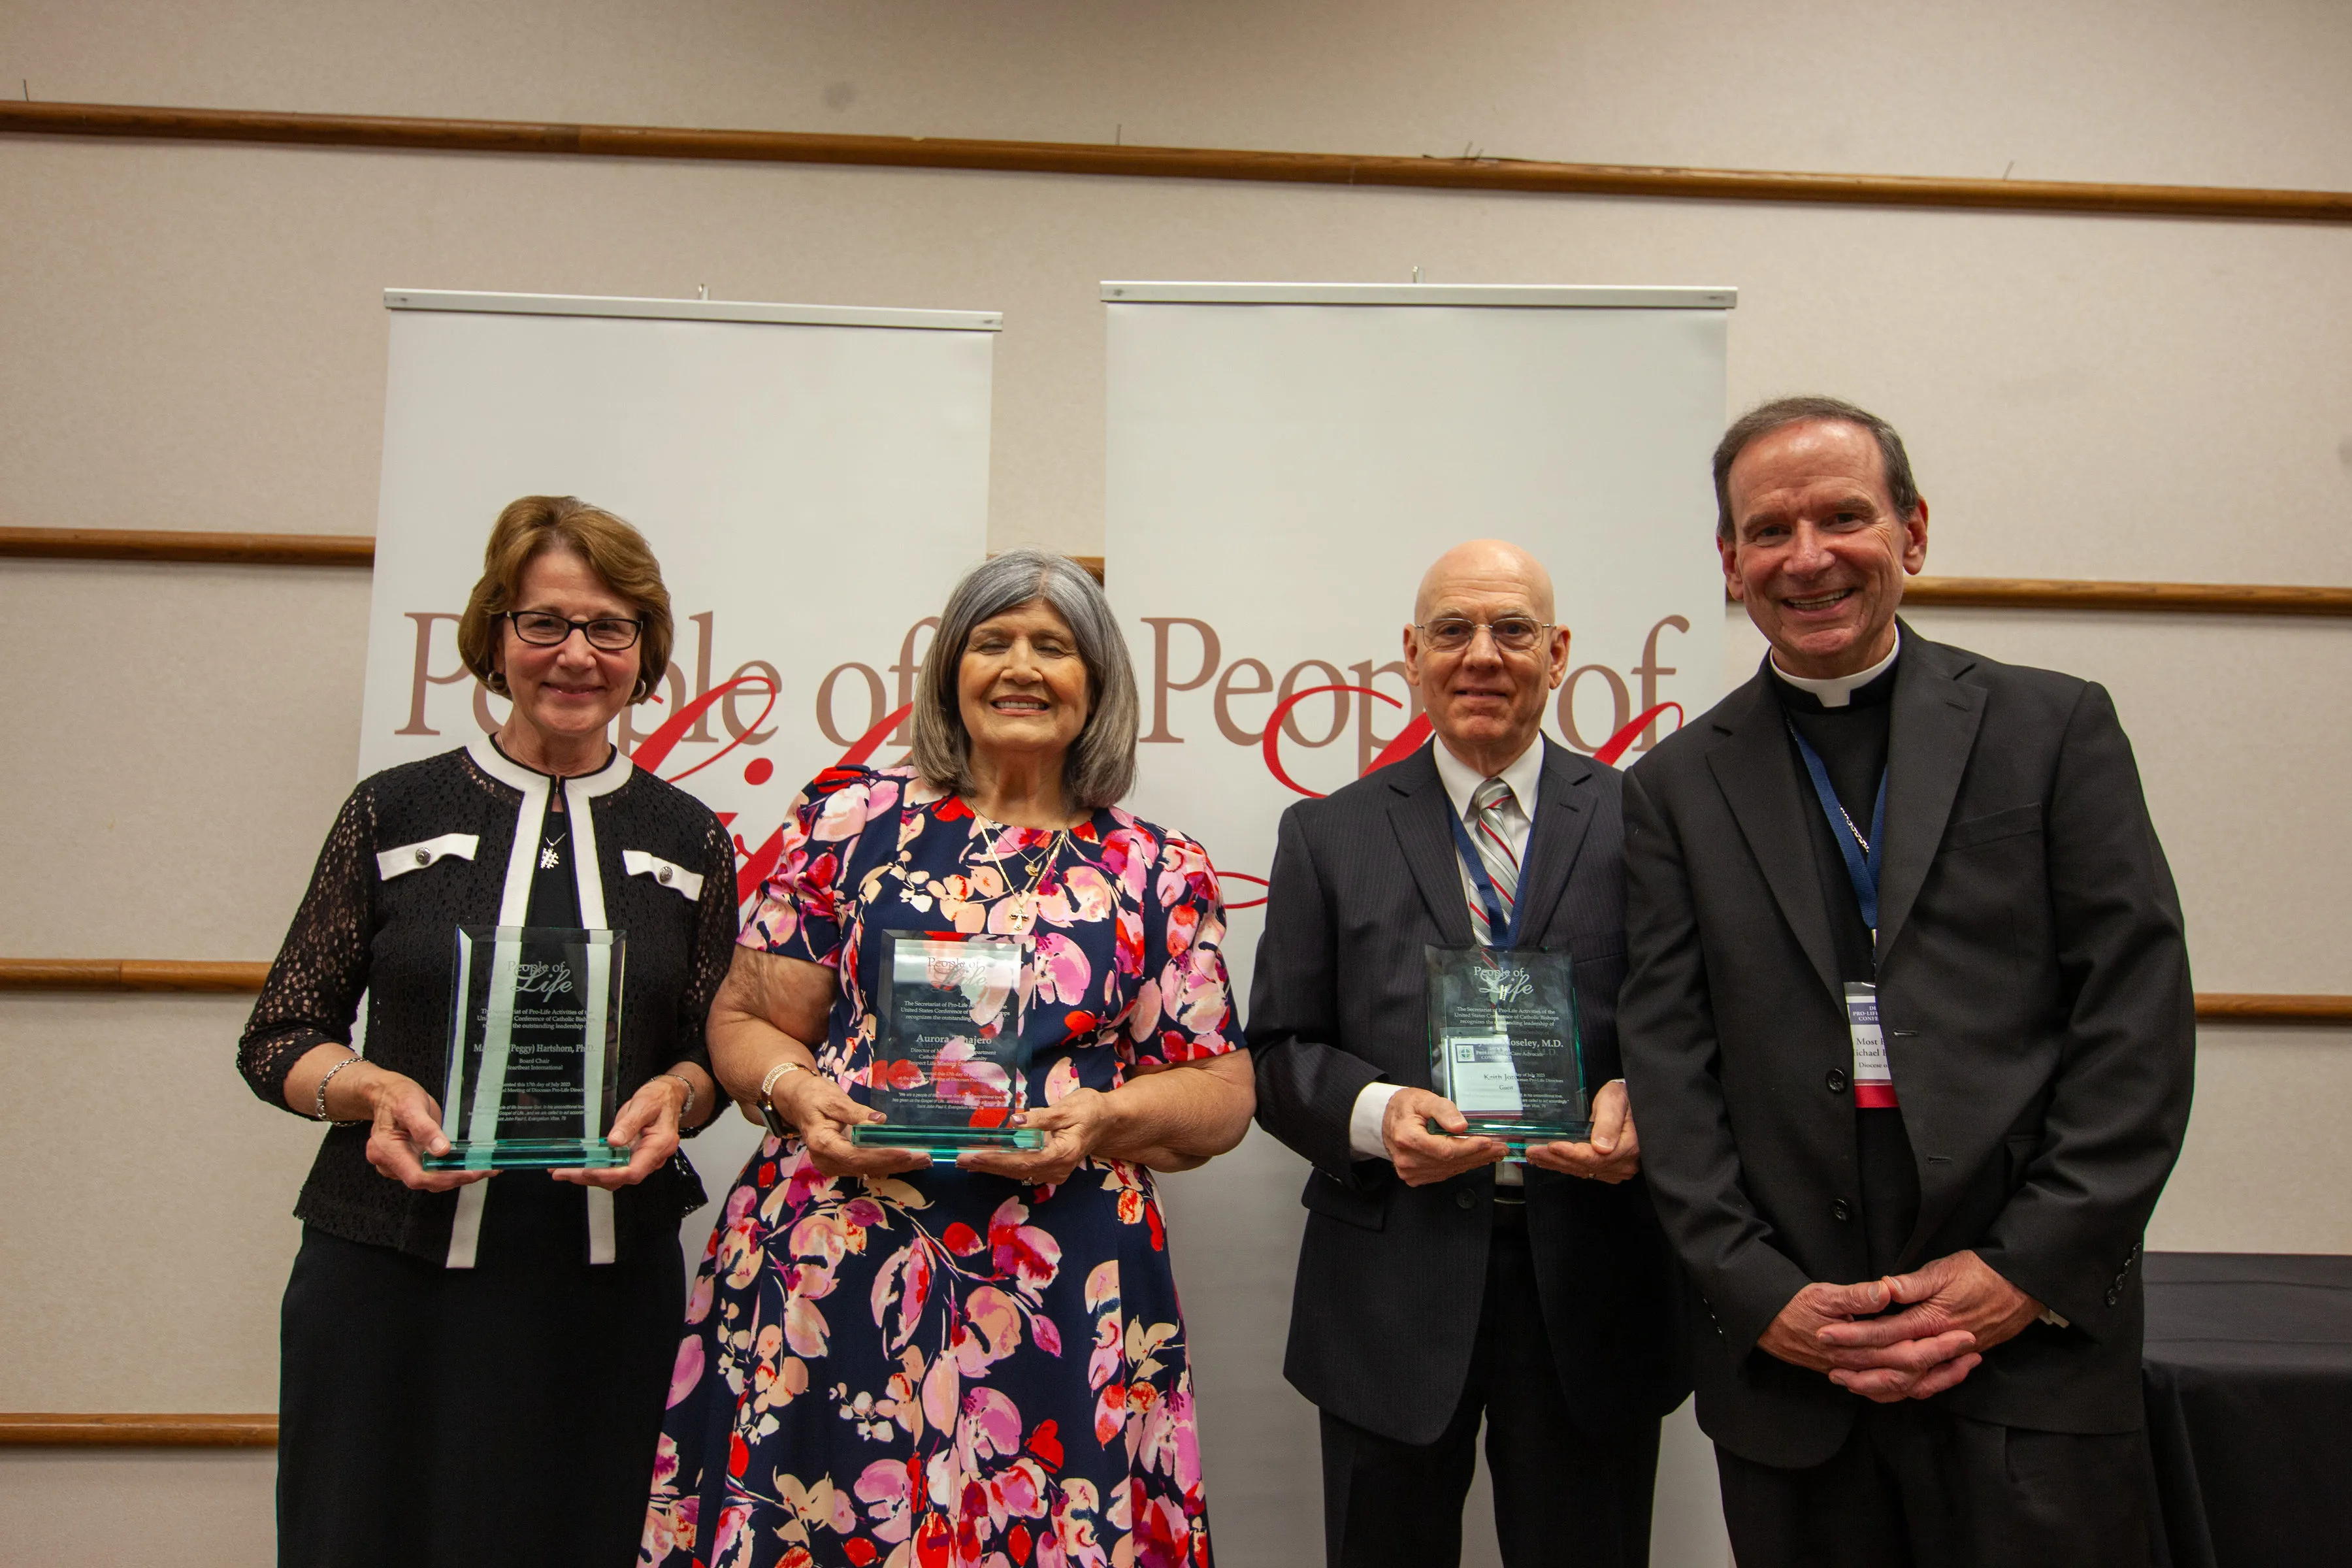 The U.S. Conference of Catholic Bishops on July 17, 2023, honored three champions of the pro-life cause at its People of Life awards during the annual Diocesan Pro-Life Leadership Conference in Toledo, Ohio. Pictured left to right are award recipients Margaret Hartshorn and Aurora Tinajero; Keith Moseley, husband of Kathryn Moseley, who passed away in June and received the award posthumously; and Bishop Michael Burbidge, chairman of the USCCB Committee on Pro-Life Activities.?w=200&h=150